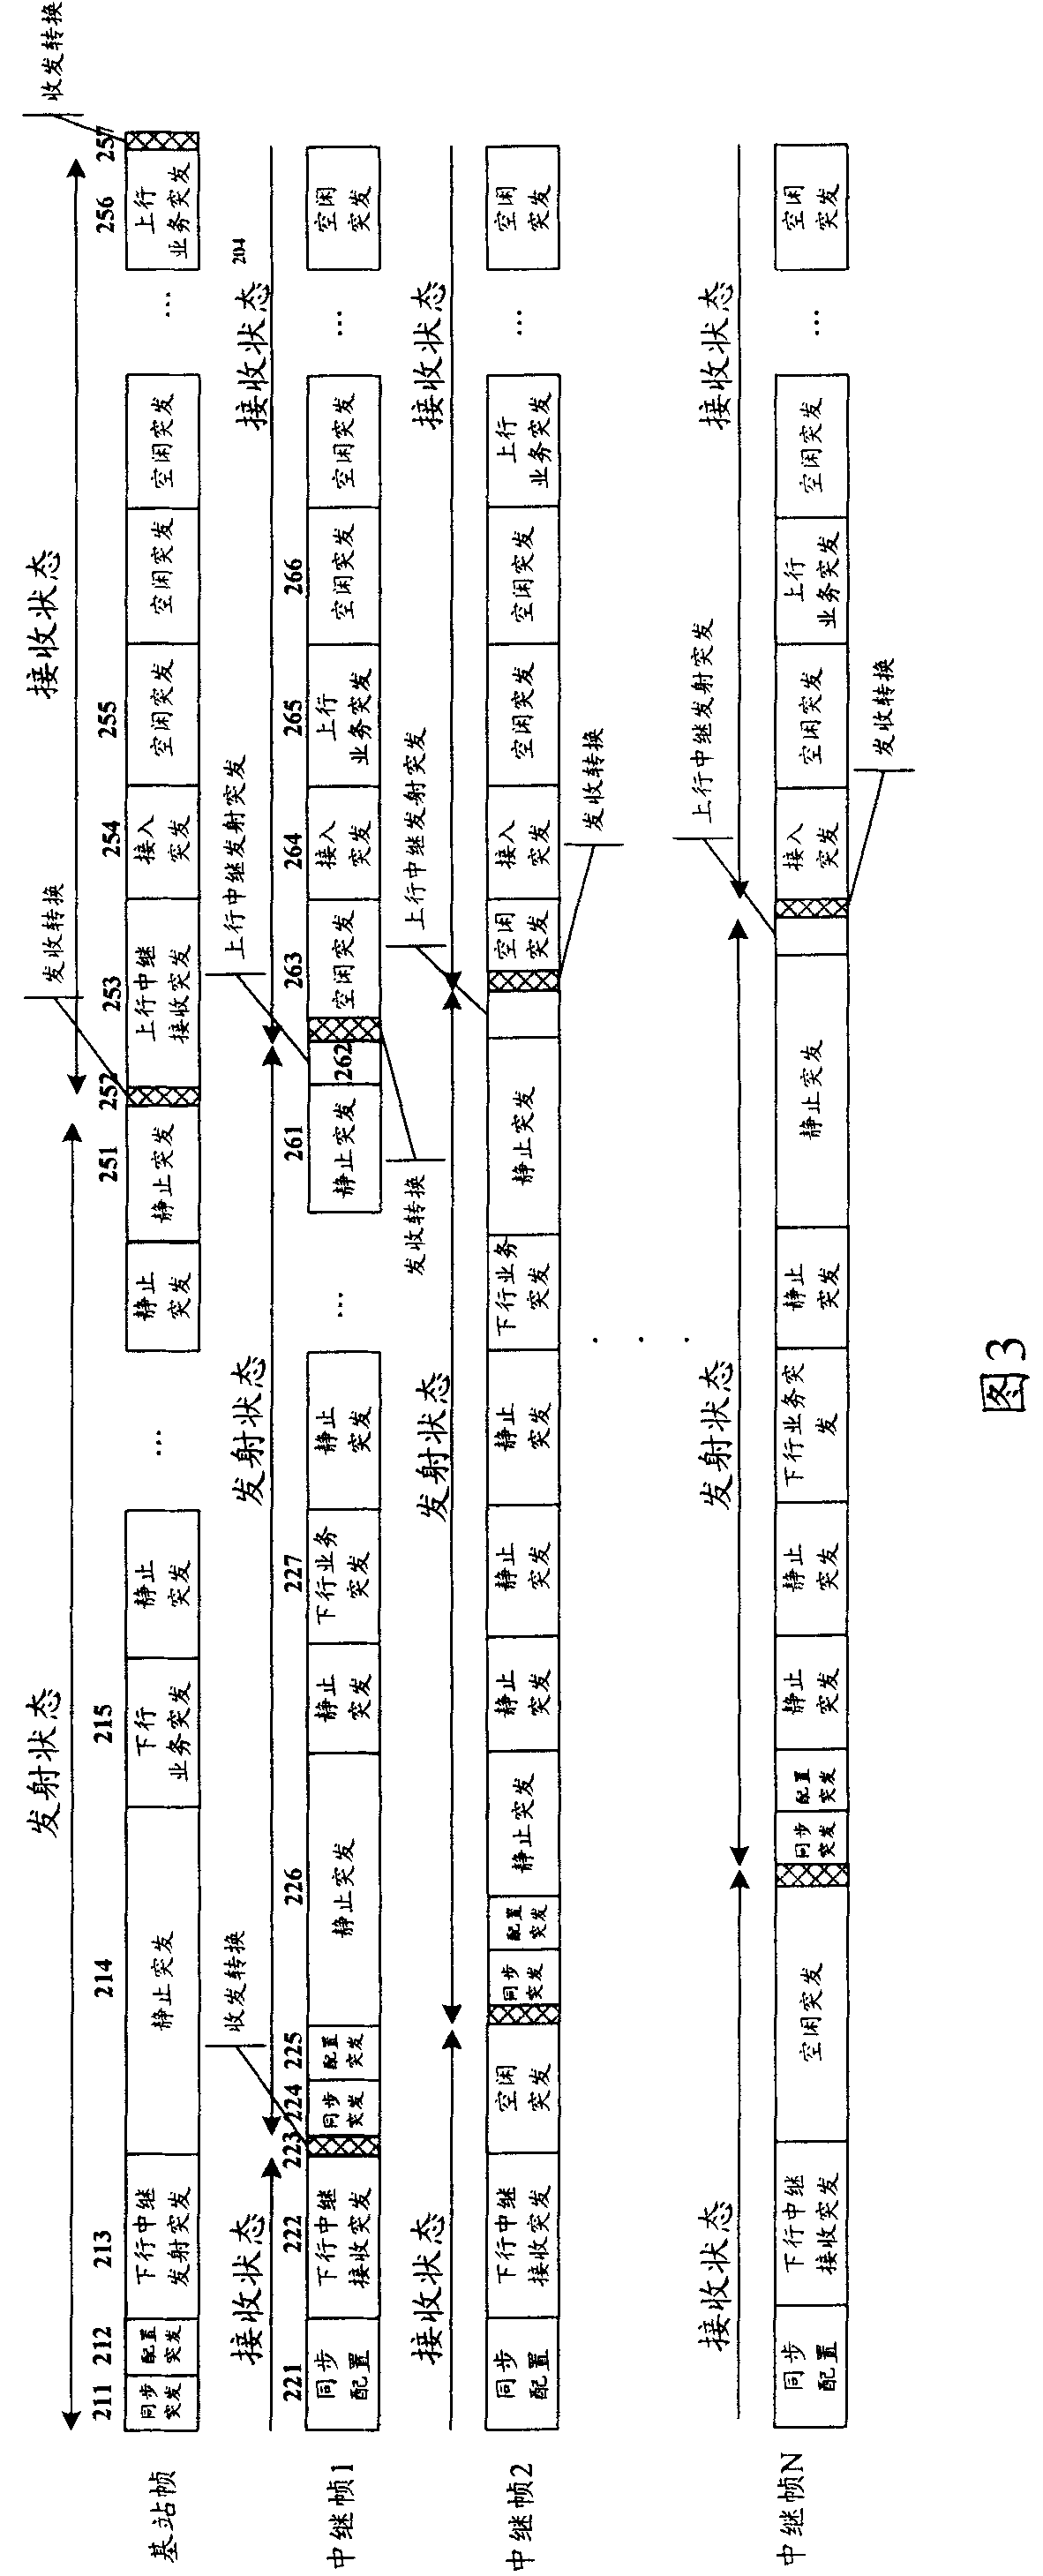 Apparatus and method for wireless signal relay processing